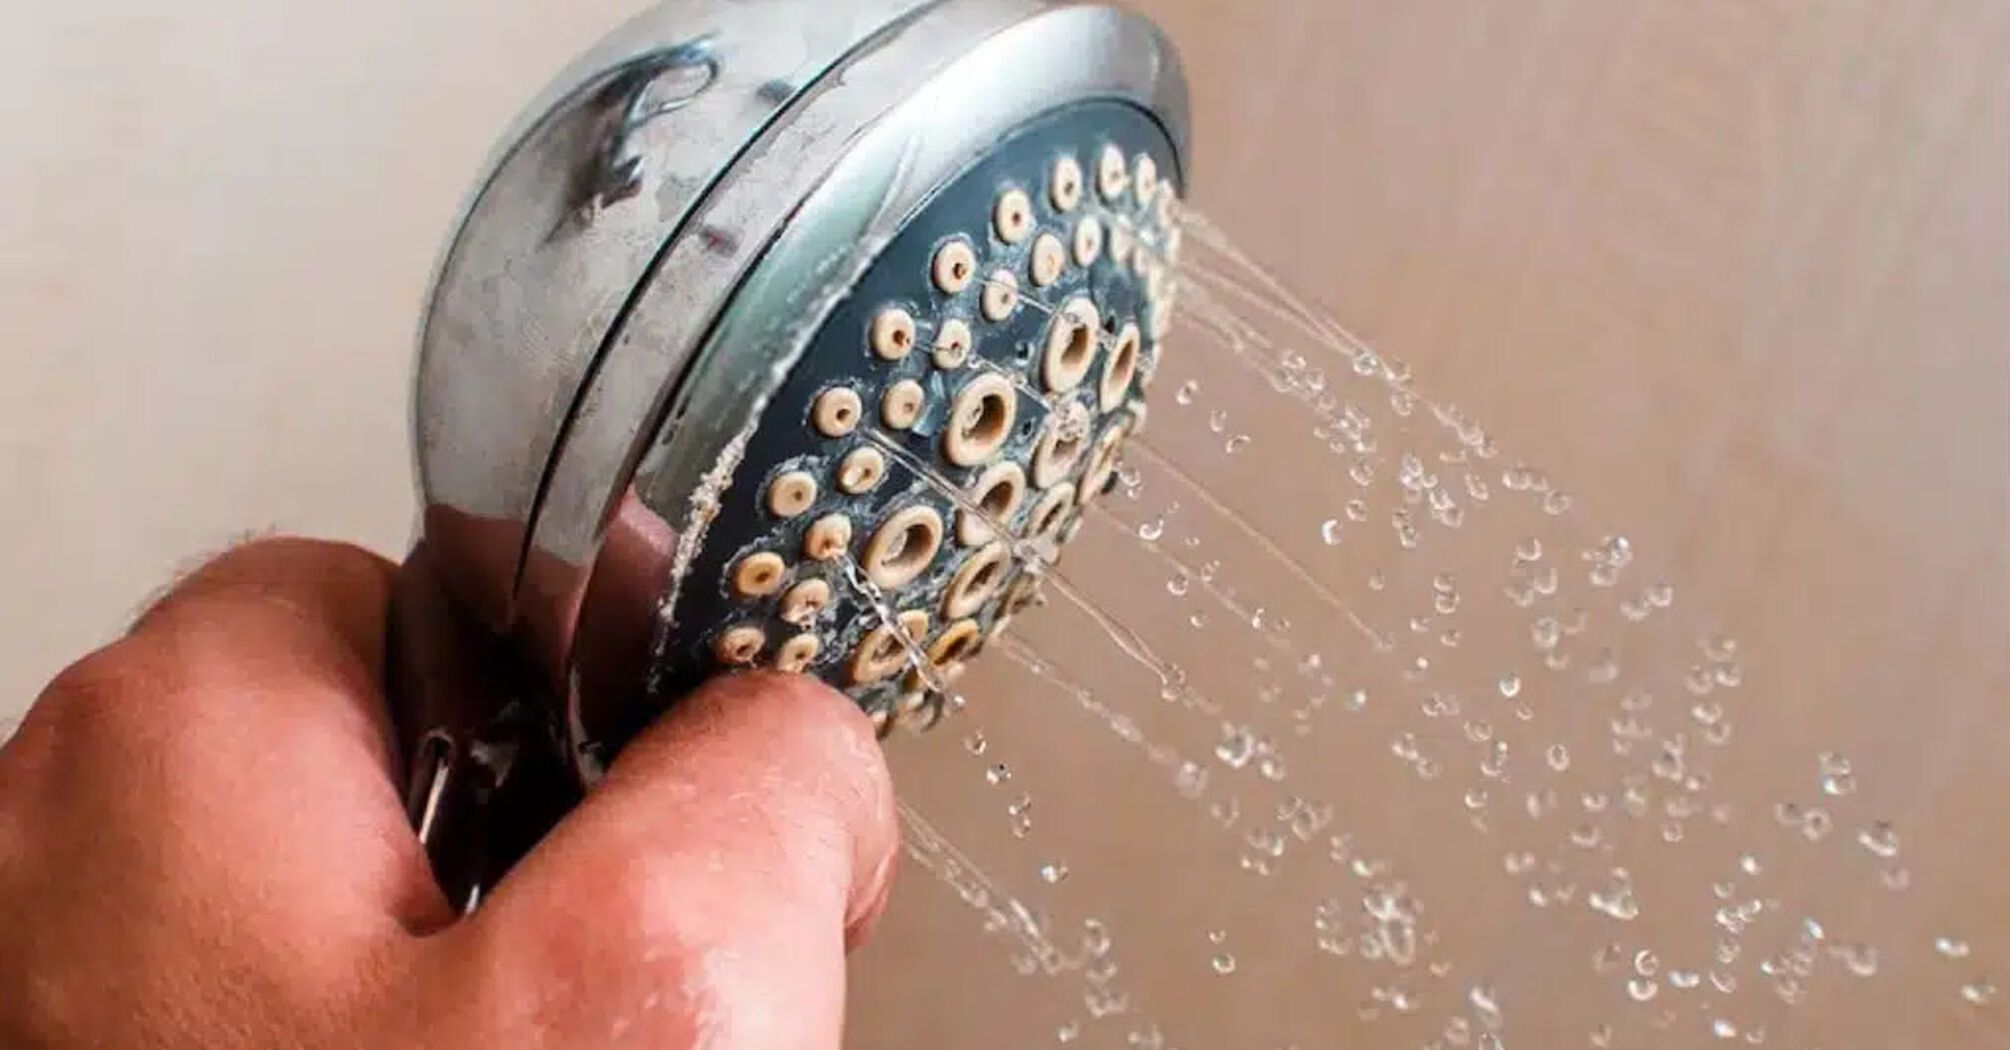 How to get rid of plaque on shower head